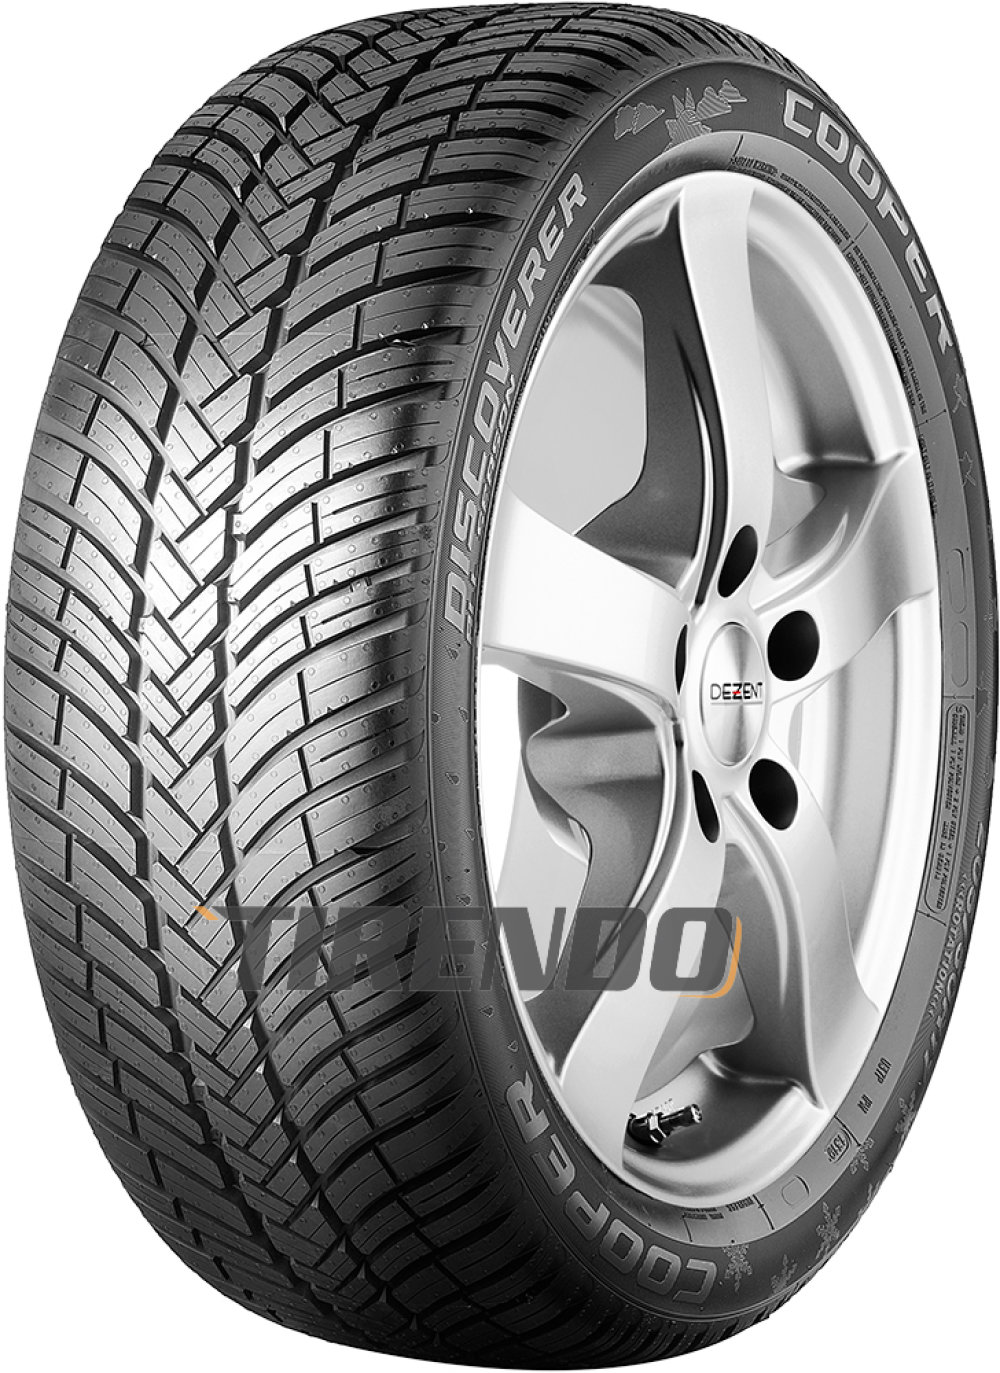 Image of Cooper Discoverer All Season ( 175/65 R14 86H XL )